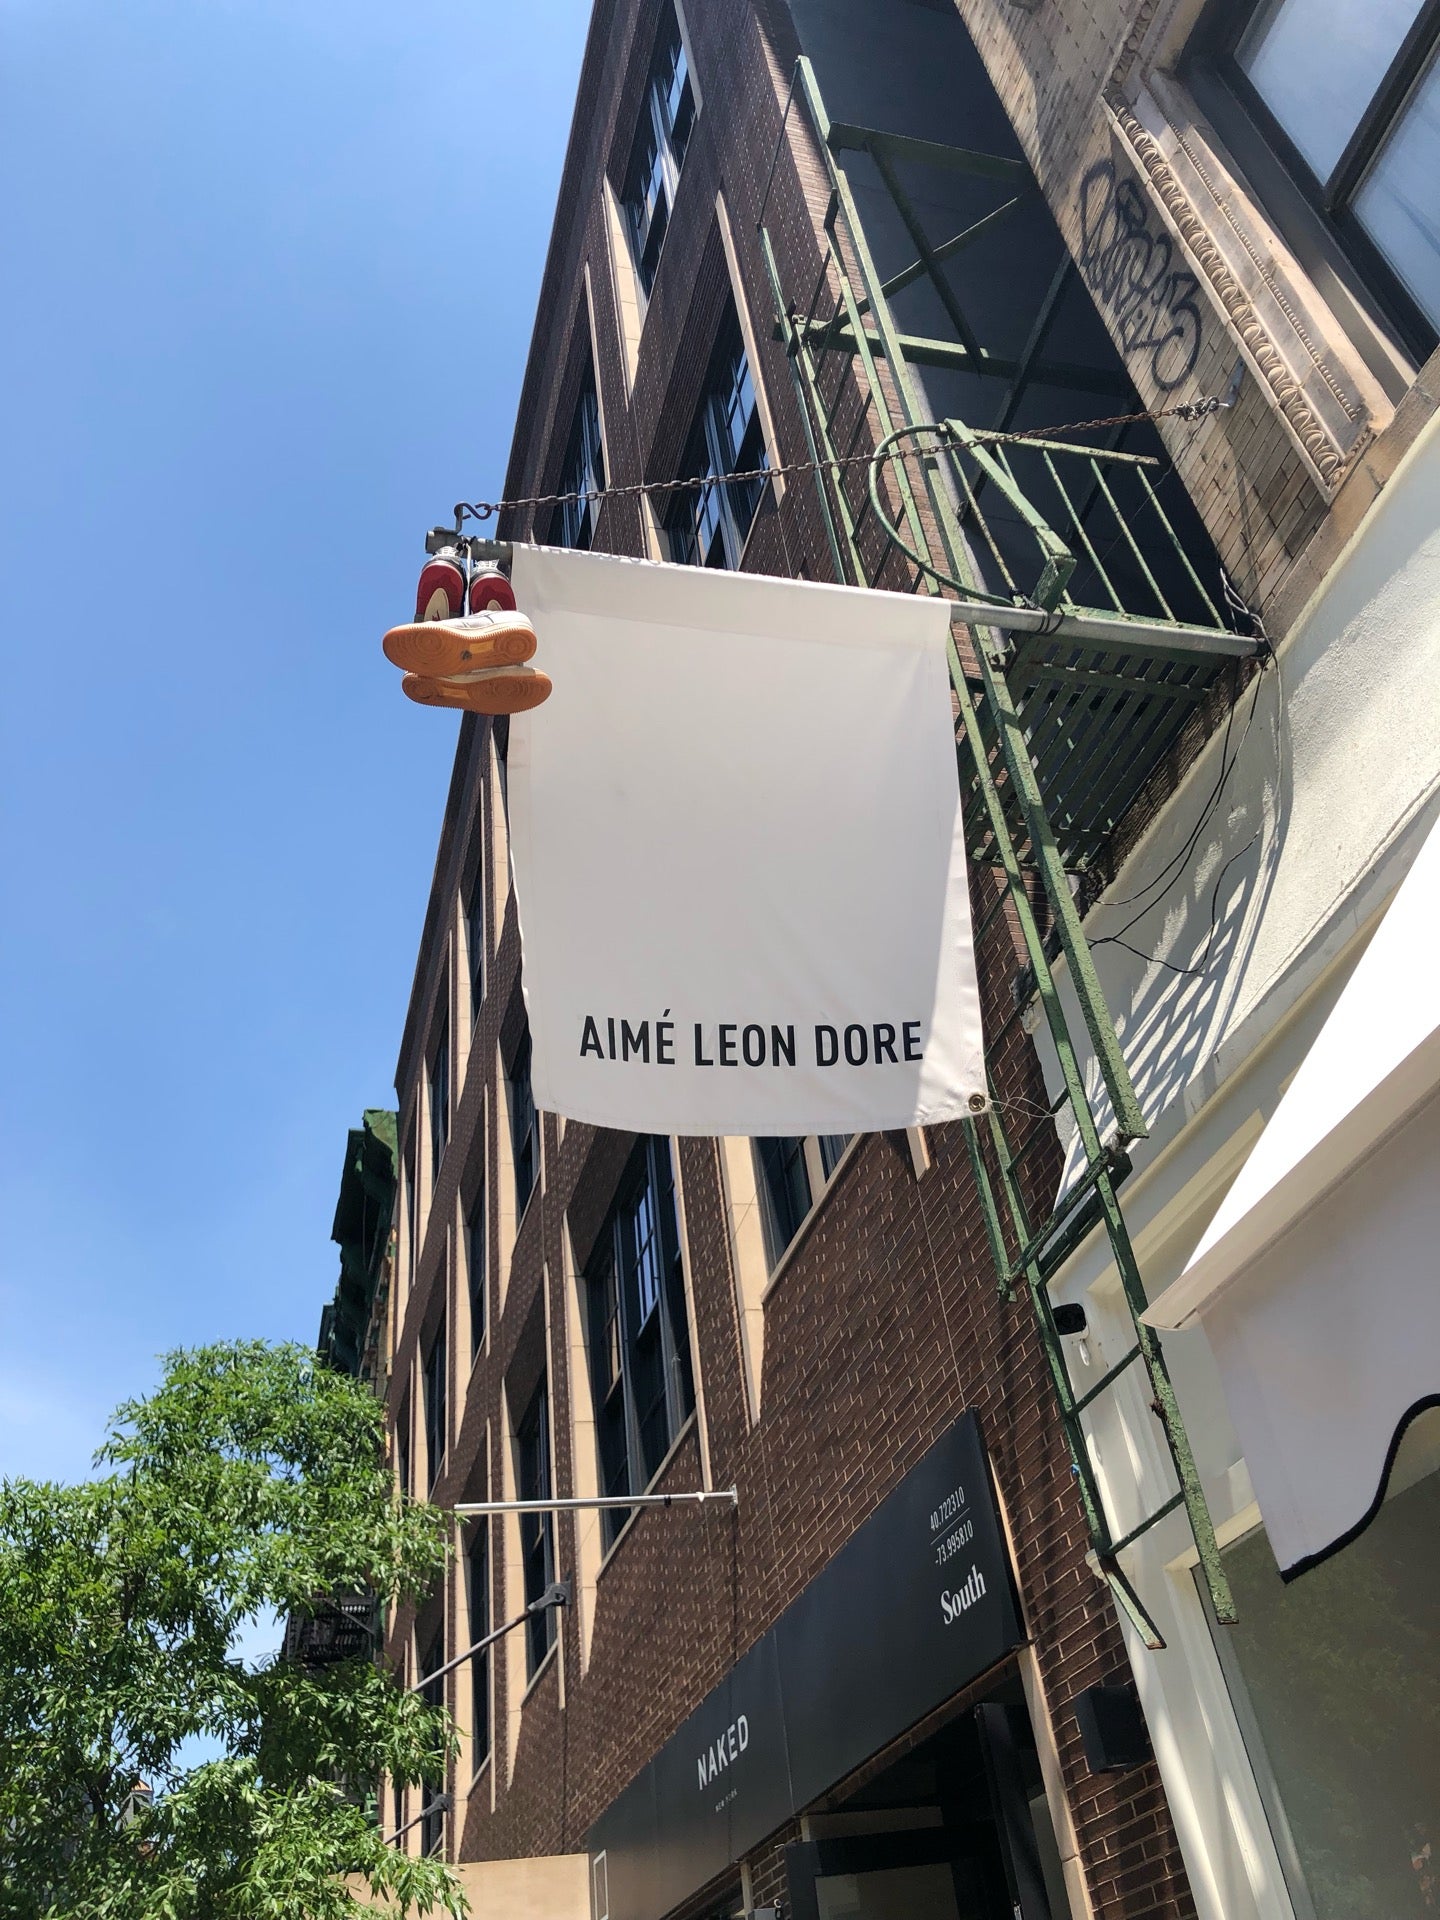 General View of the store Aime Leon Dore on Mulberry Street in